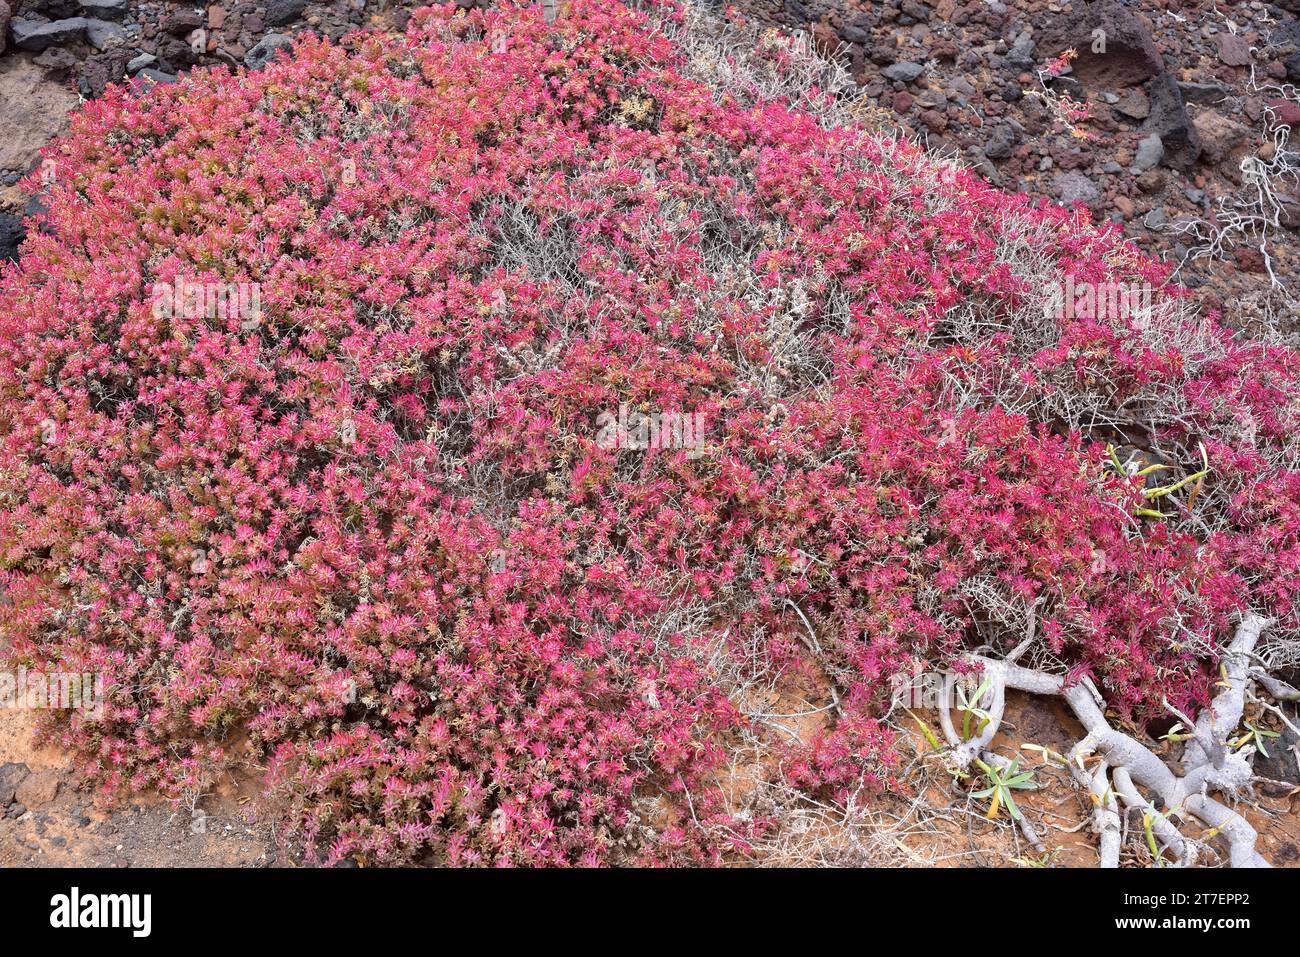 Suaeda ifniensis is a shrub endemic to Morocco (Ifni region) and eastern Canary Islands (Lanzarote and Fuerteventura). This photo was taken in Lanzaro Stock Photo